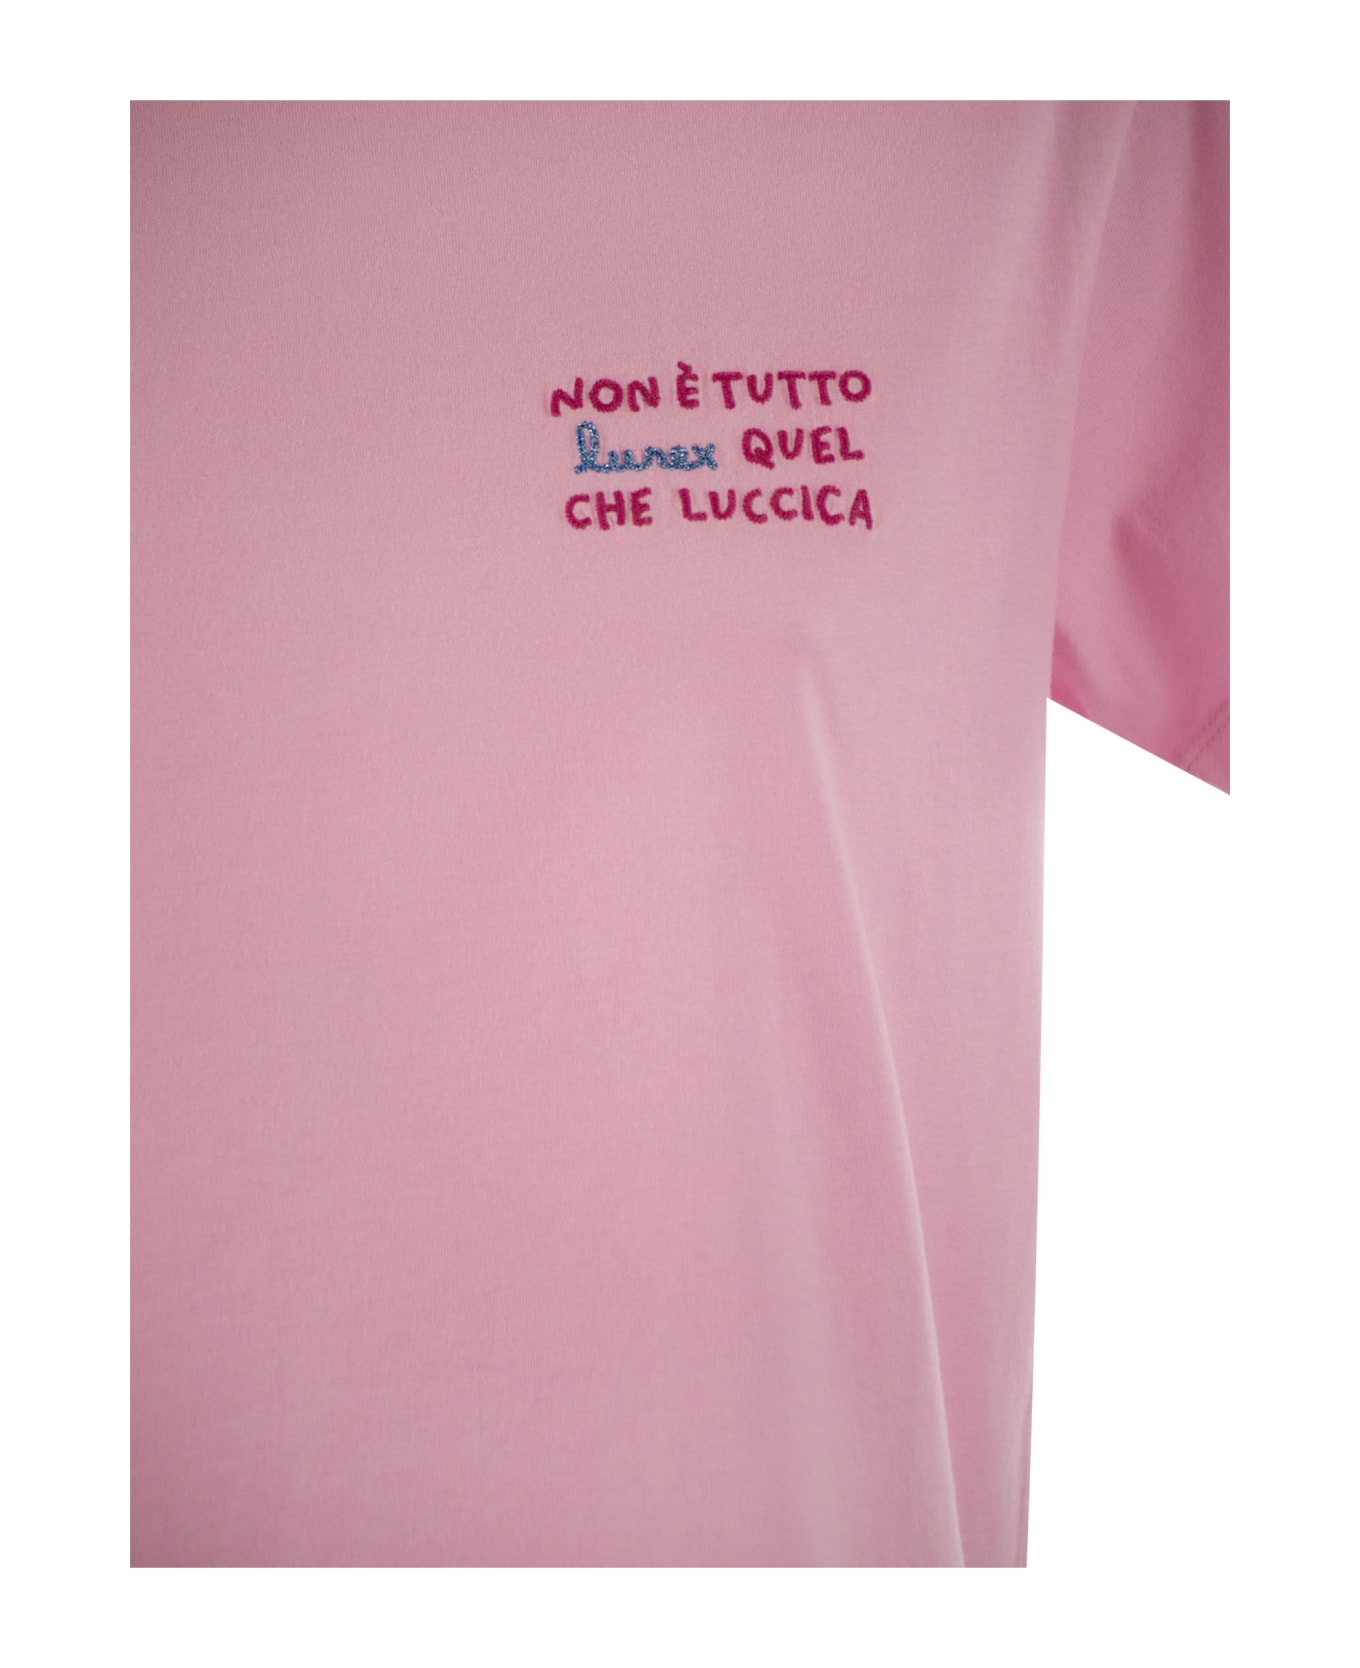 MC2 Saint Barth Emilie - T-shirt With Embroidery On Chest - Pink